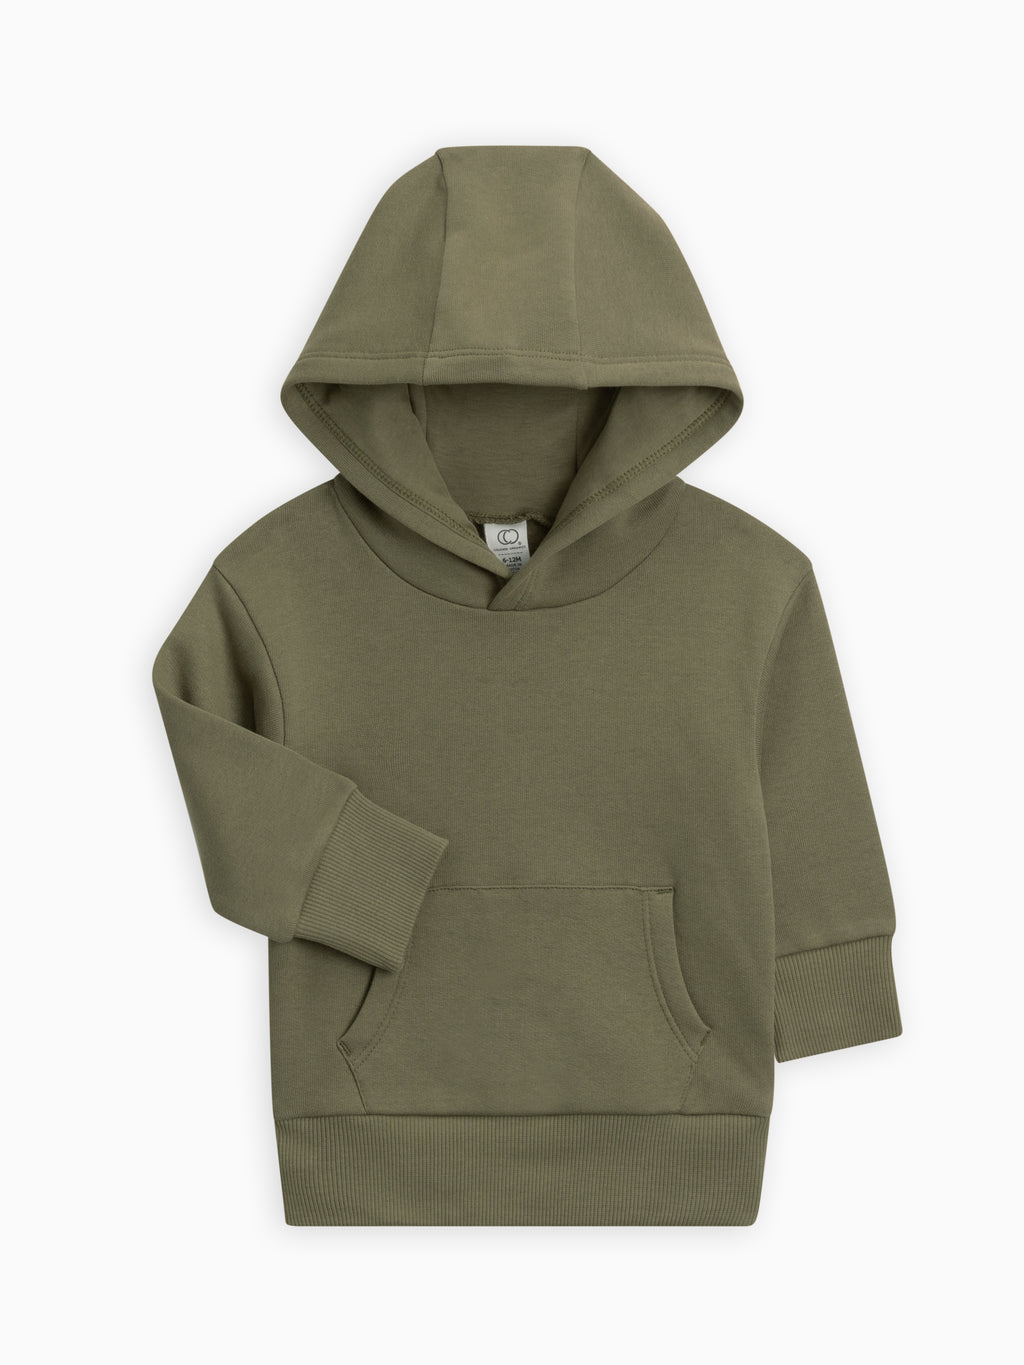 YoungLA Hoodie Men Small Olive Green Sweater Pullover Fleece Spell Out